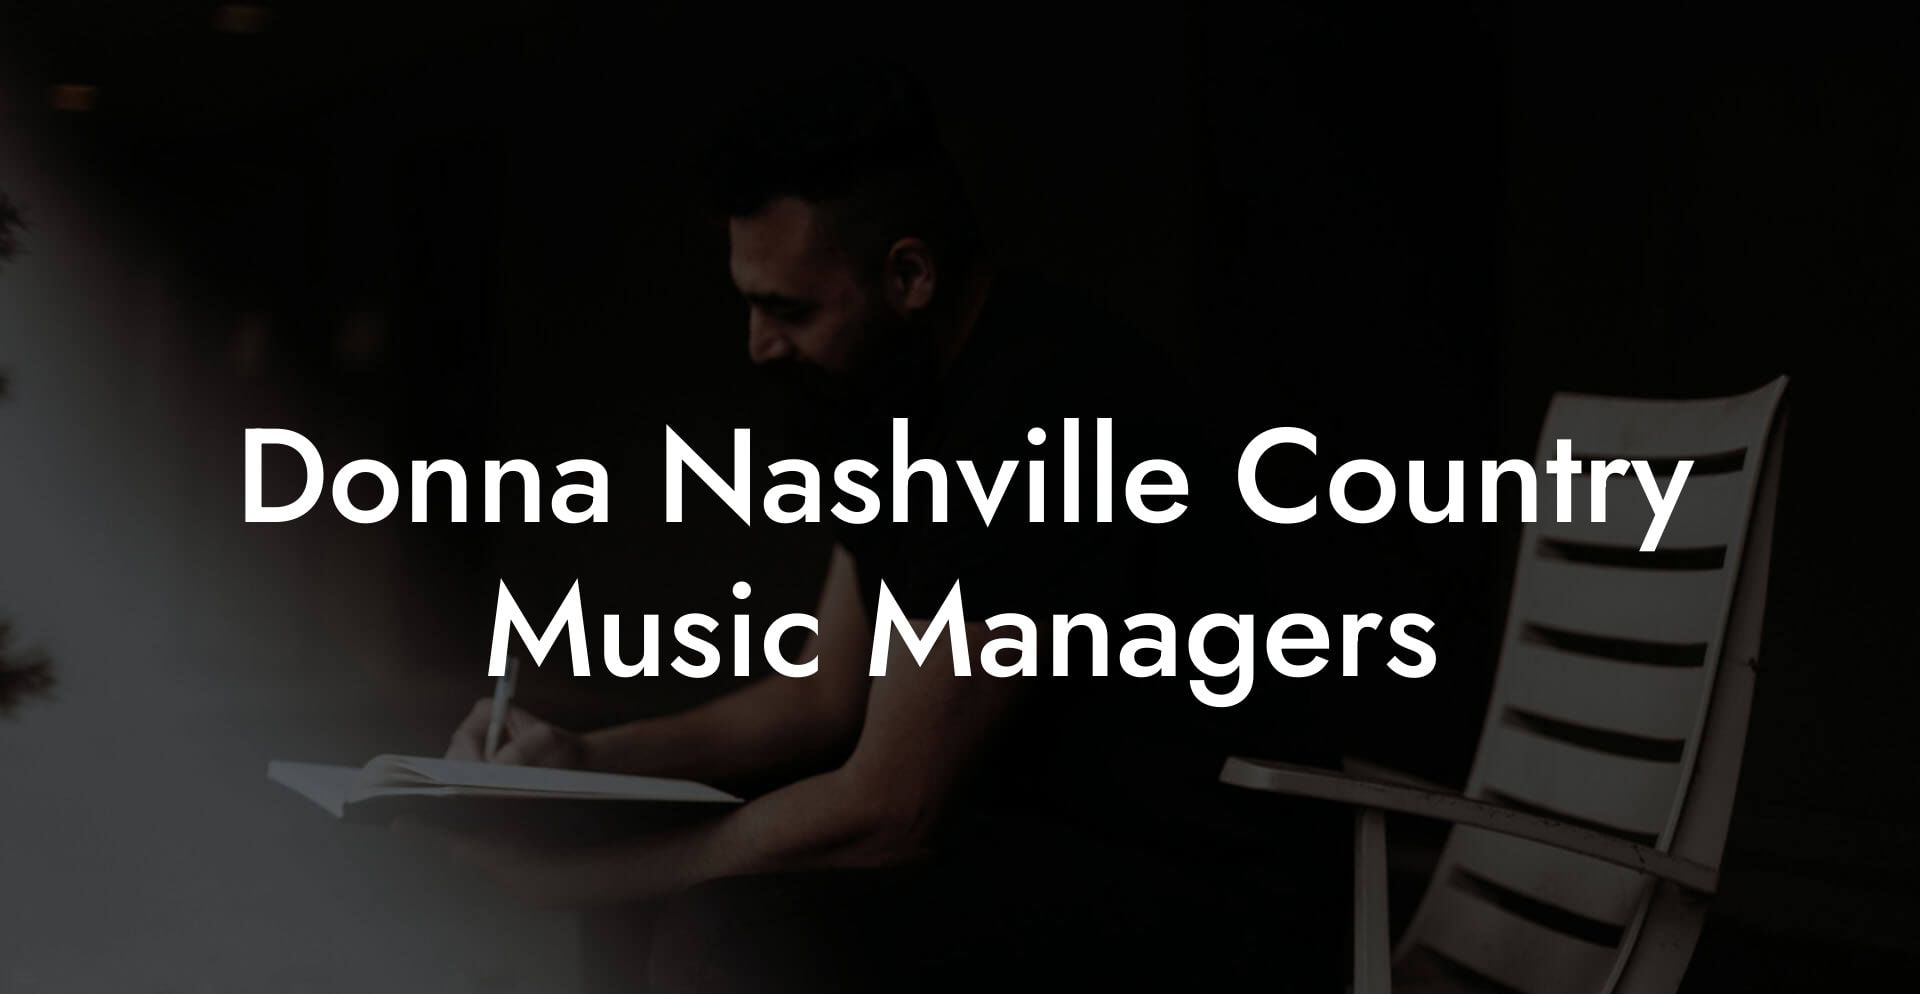 Donna Nashville Country Music Managers